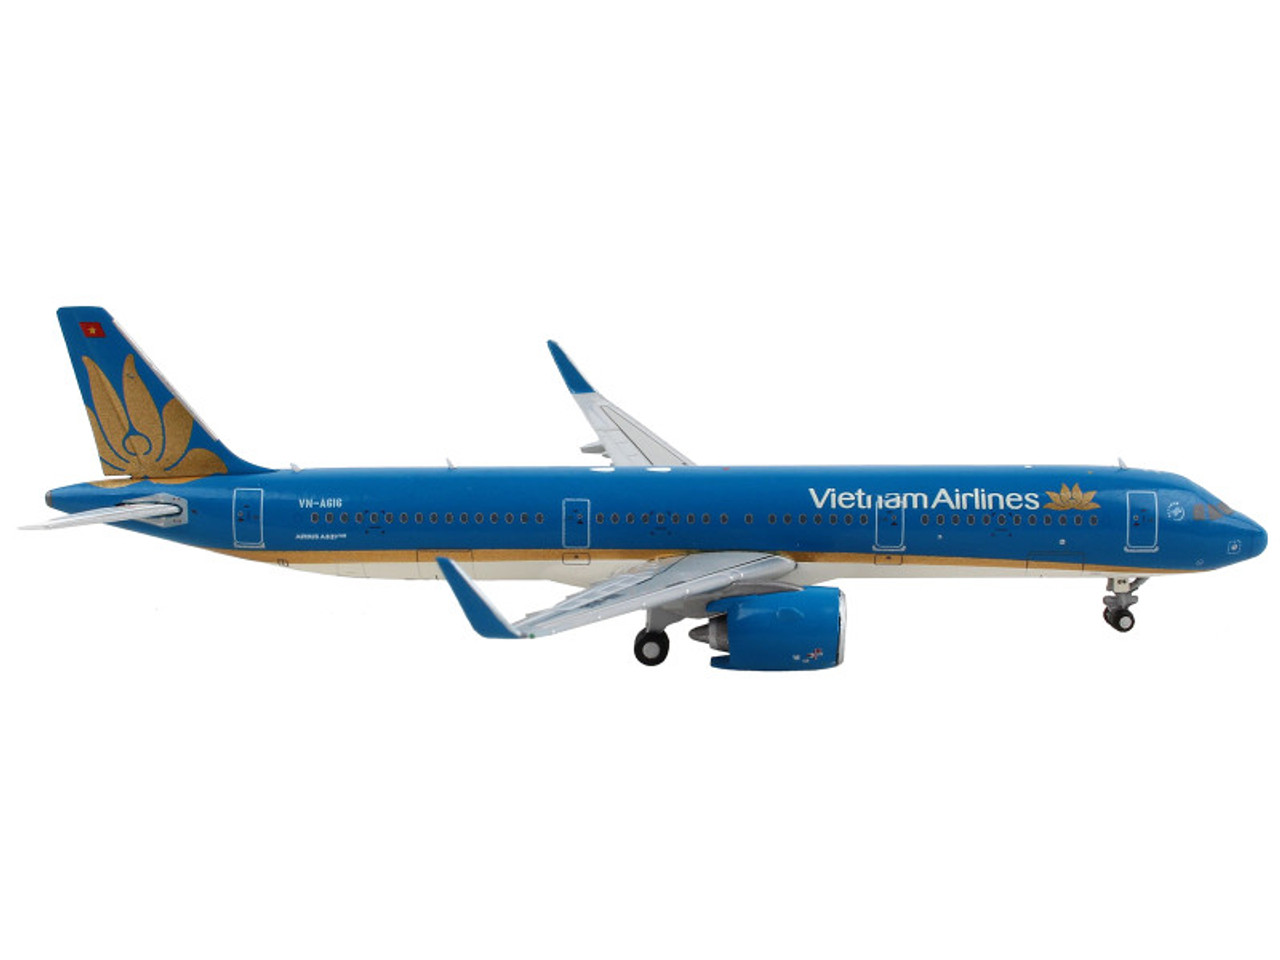 Airbus A321neo Commercial Aircraft "Vietnam Airlines" Blue 1/400 Diecast Model Airplane by GeminiJets